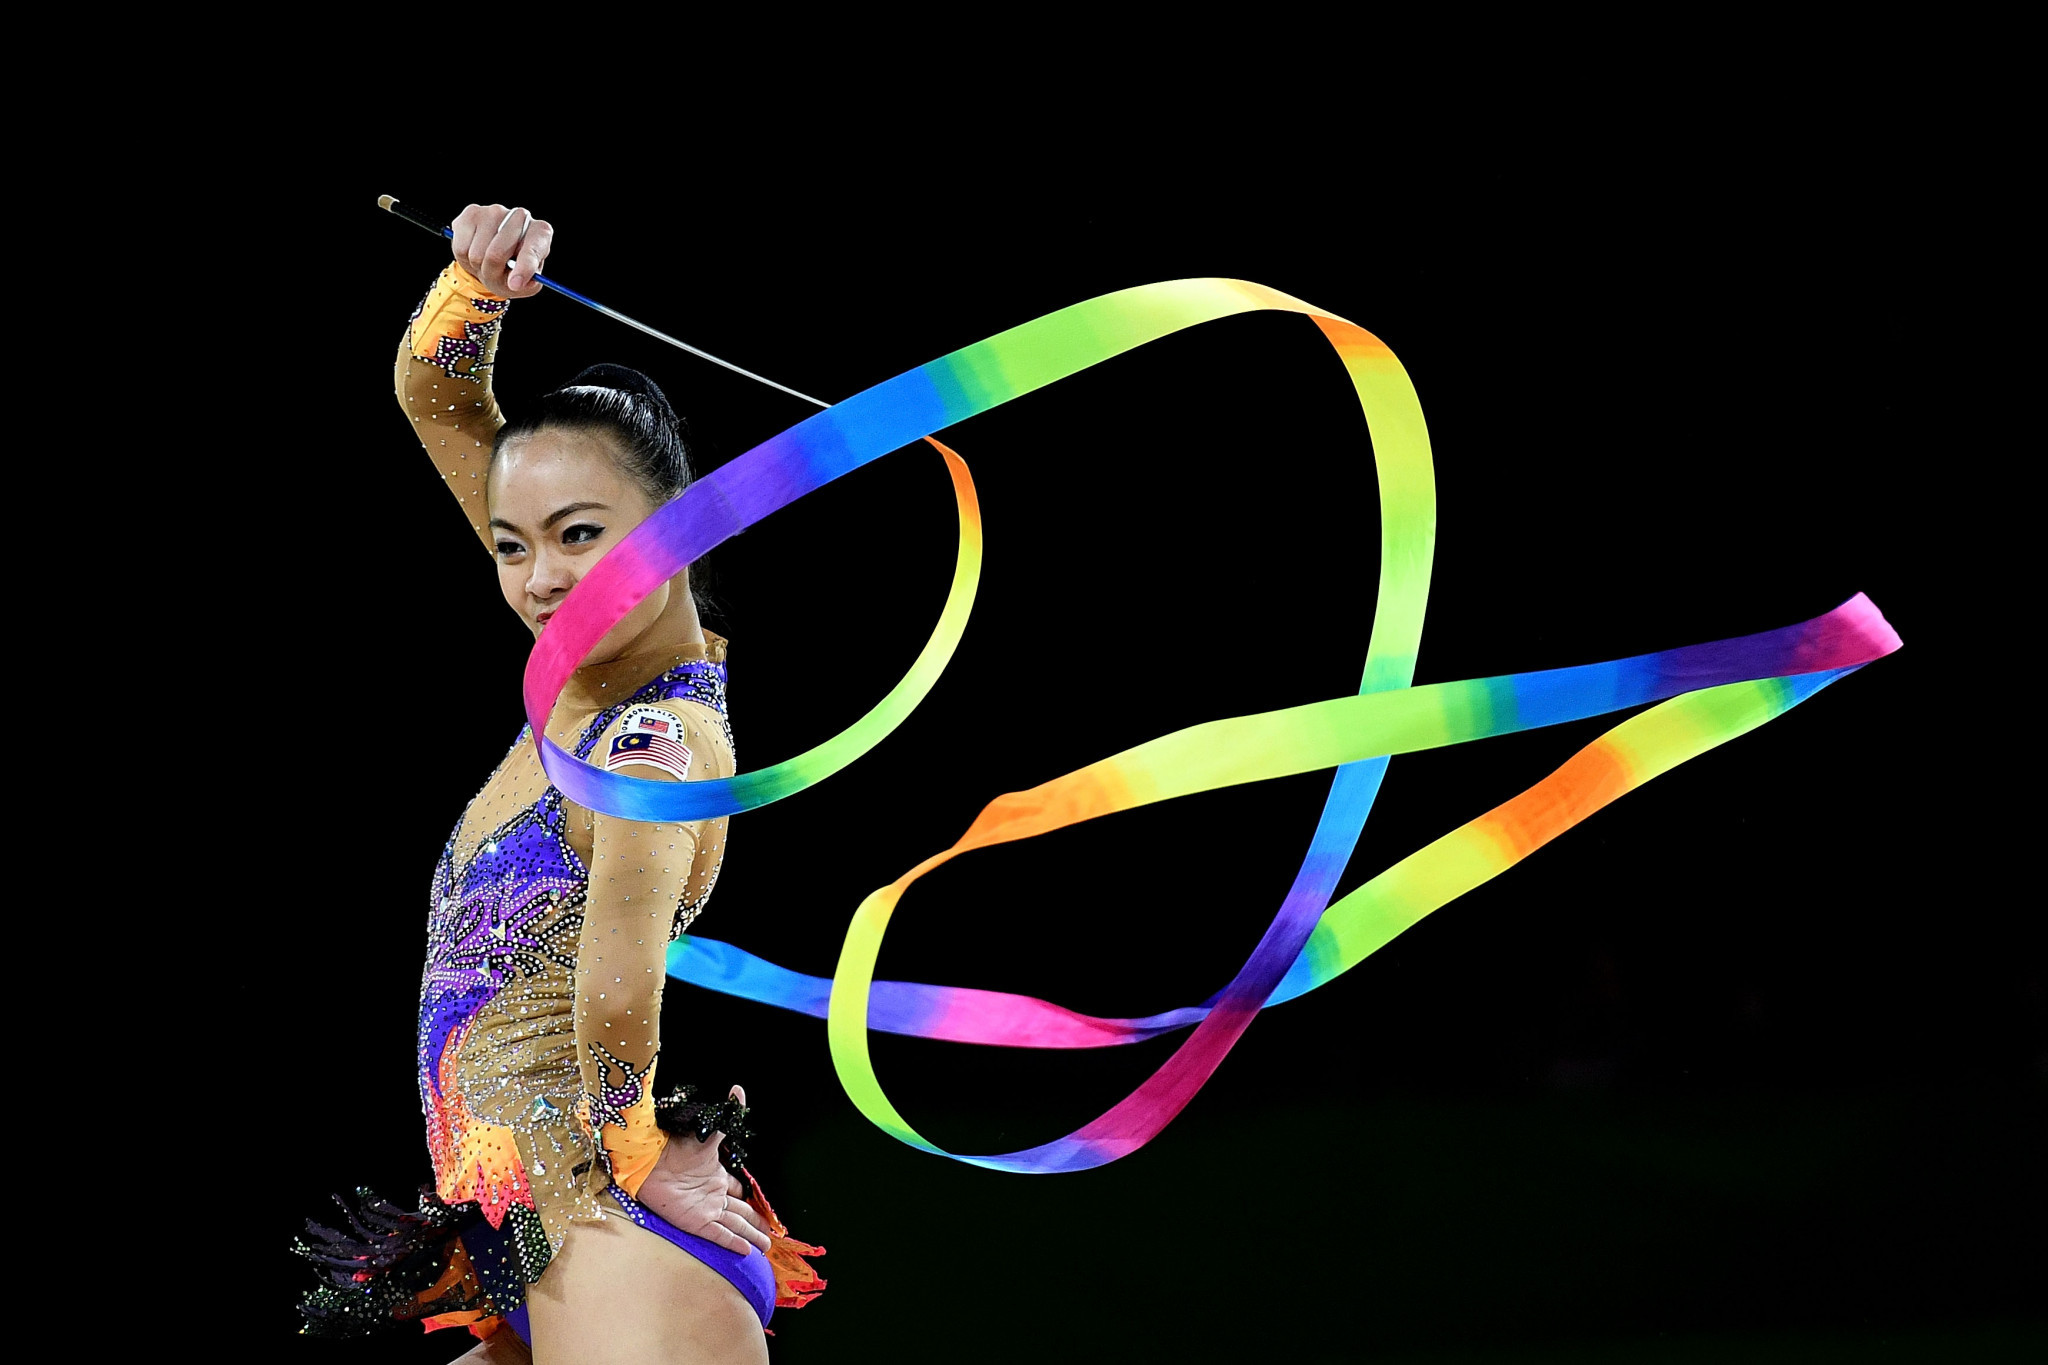 Rhythmic gymnastics is one of the sports the OCM hopes to claim a gold medal in ©Getty Images